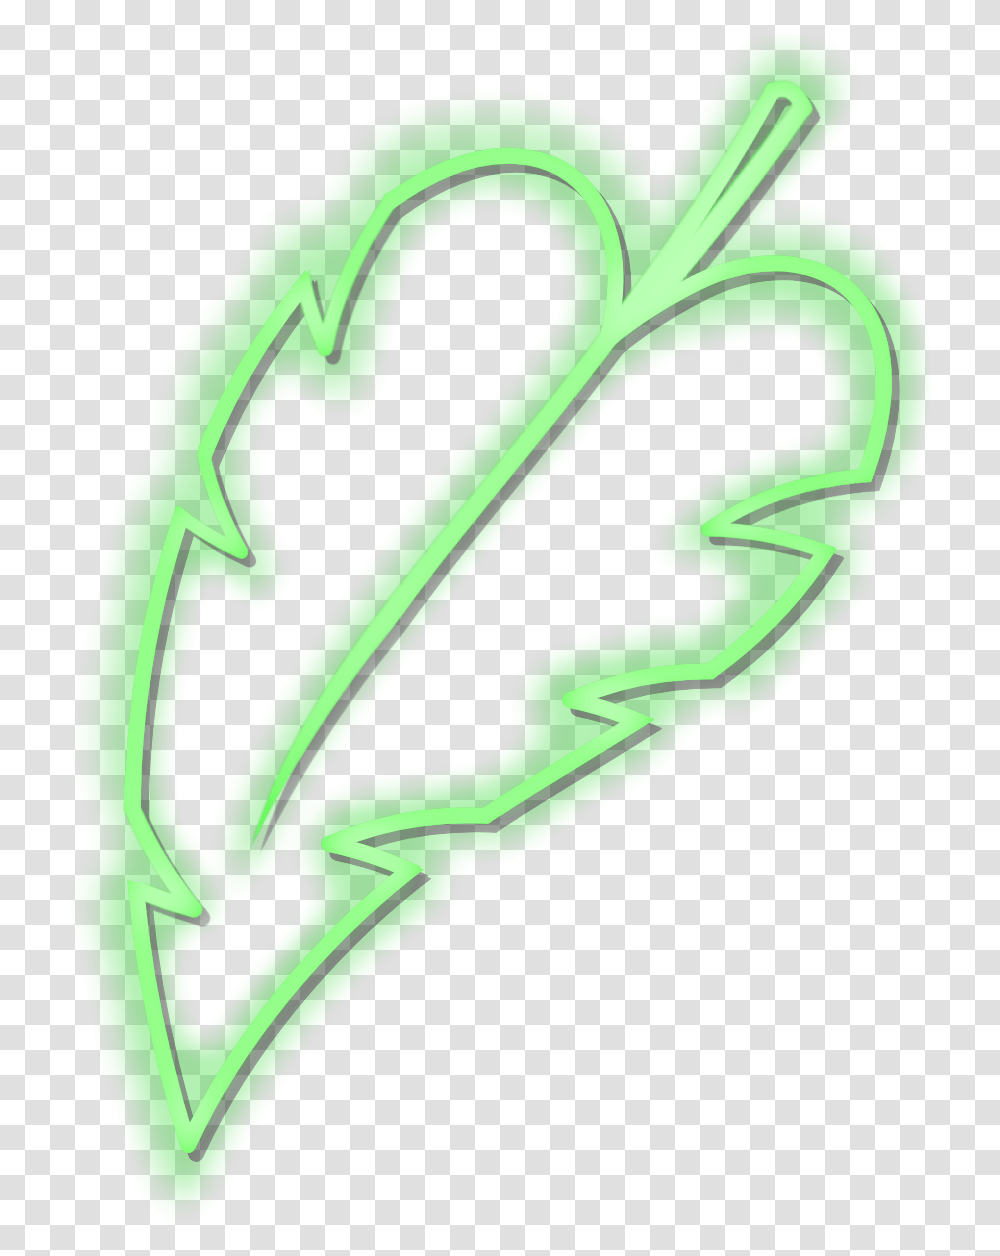 Neon Leaf Green Tropical Madewithpicsartdrawingtools Neon Tropical Leaves, Plant, Produce, Food, Vegetable Transparent Png